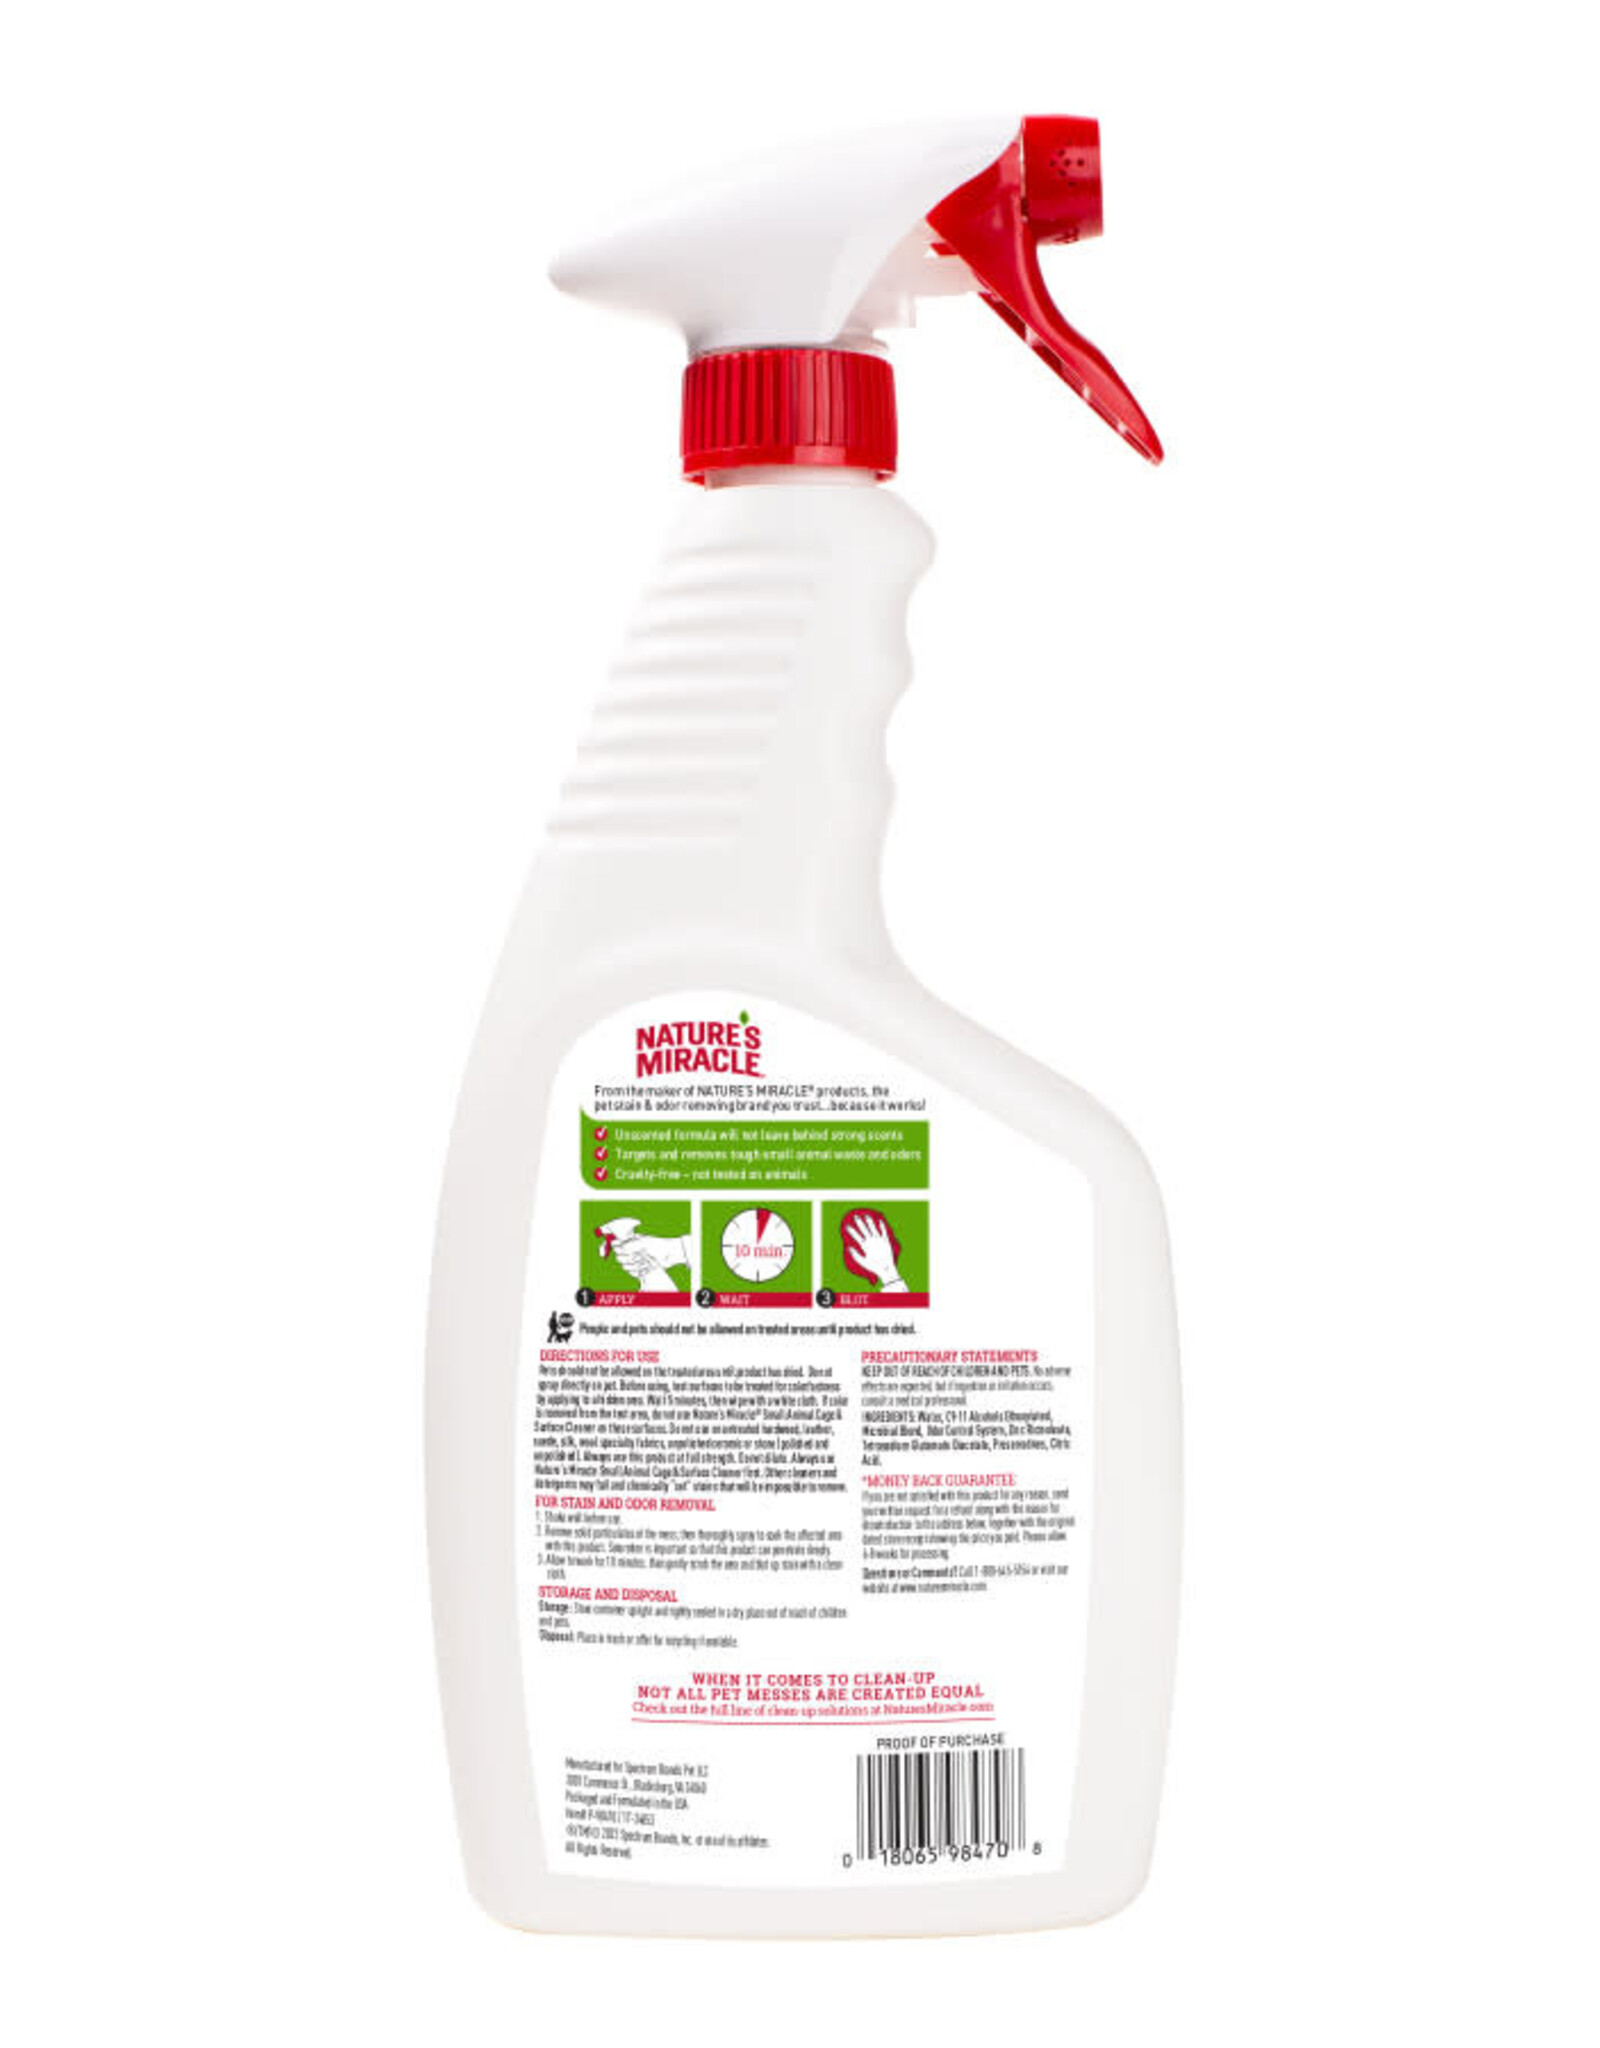 SPECTRUM BRANDS NATURE'S MIRACLE- 5x11x2- CLEANER- BIO-ENZYMATIC- CAGE AND SURFACE- SMALL ANIMAL- 24 OZ